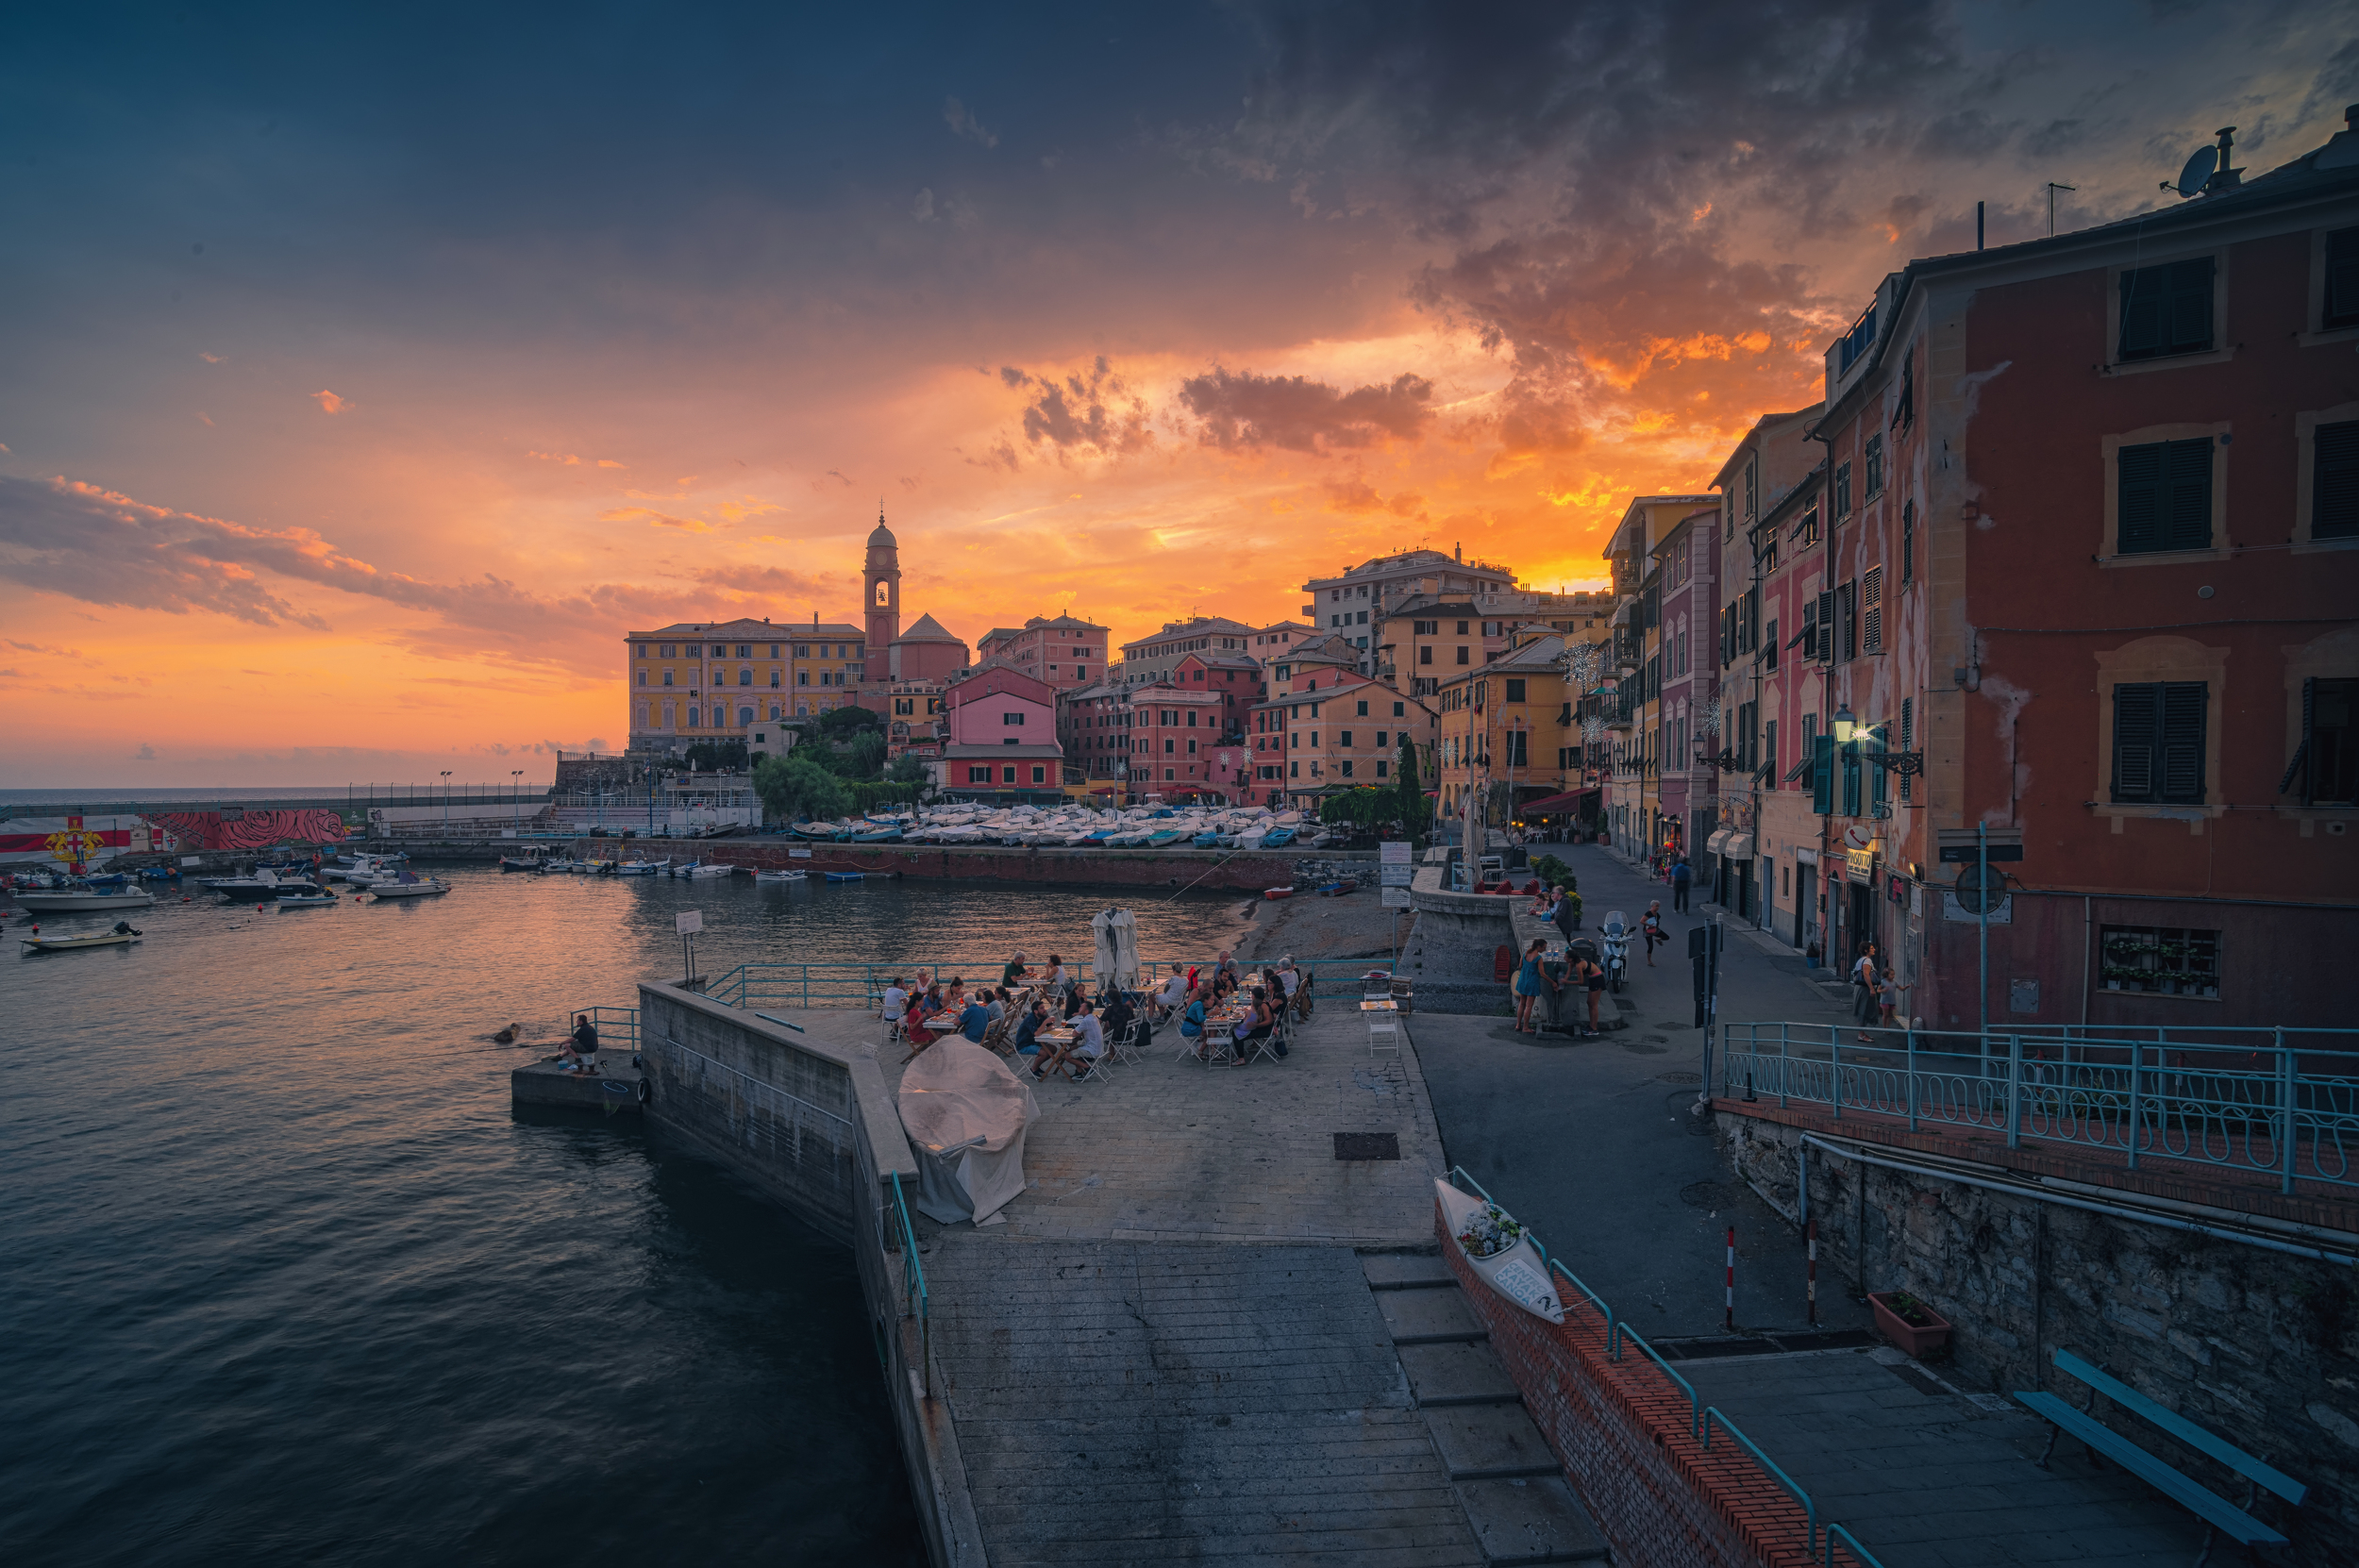 General 2500x1662 city cityscape water sunset sky clouds warm light urban outdoors photography people architecture Italian Andrey Ozherelev Genoa Nervi